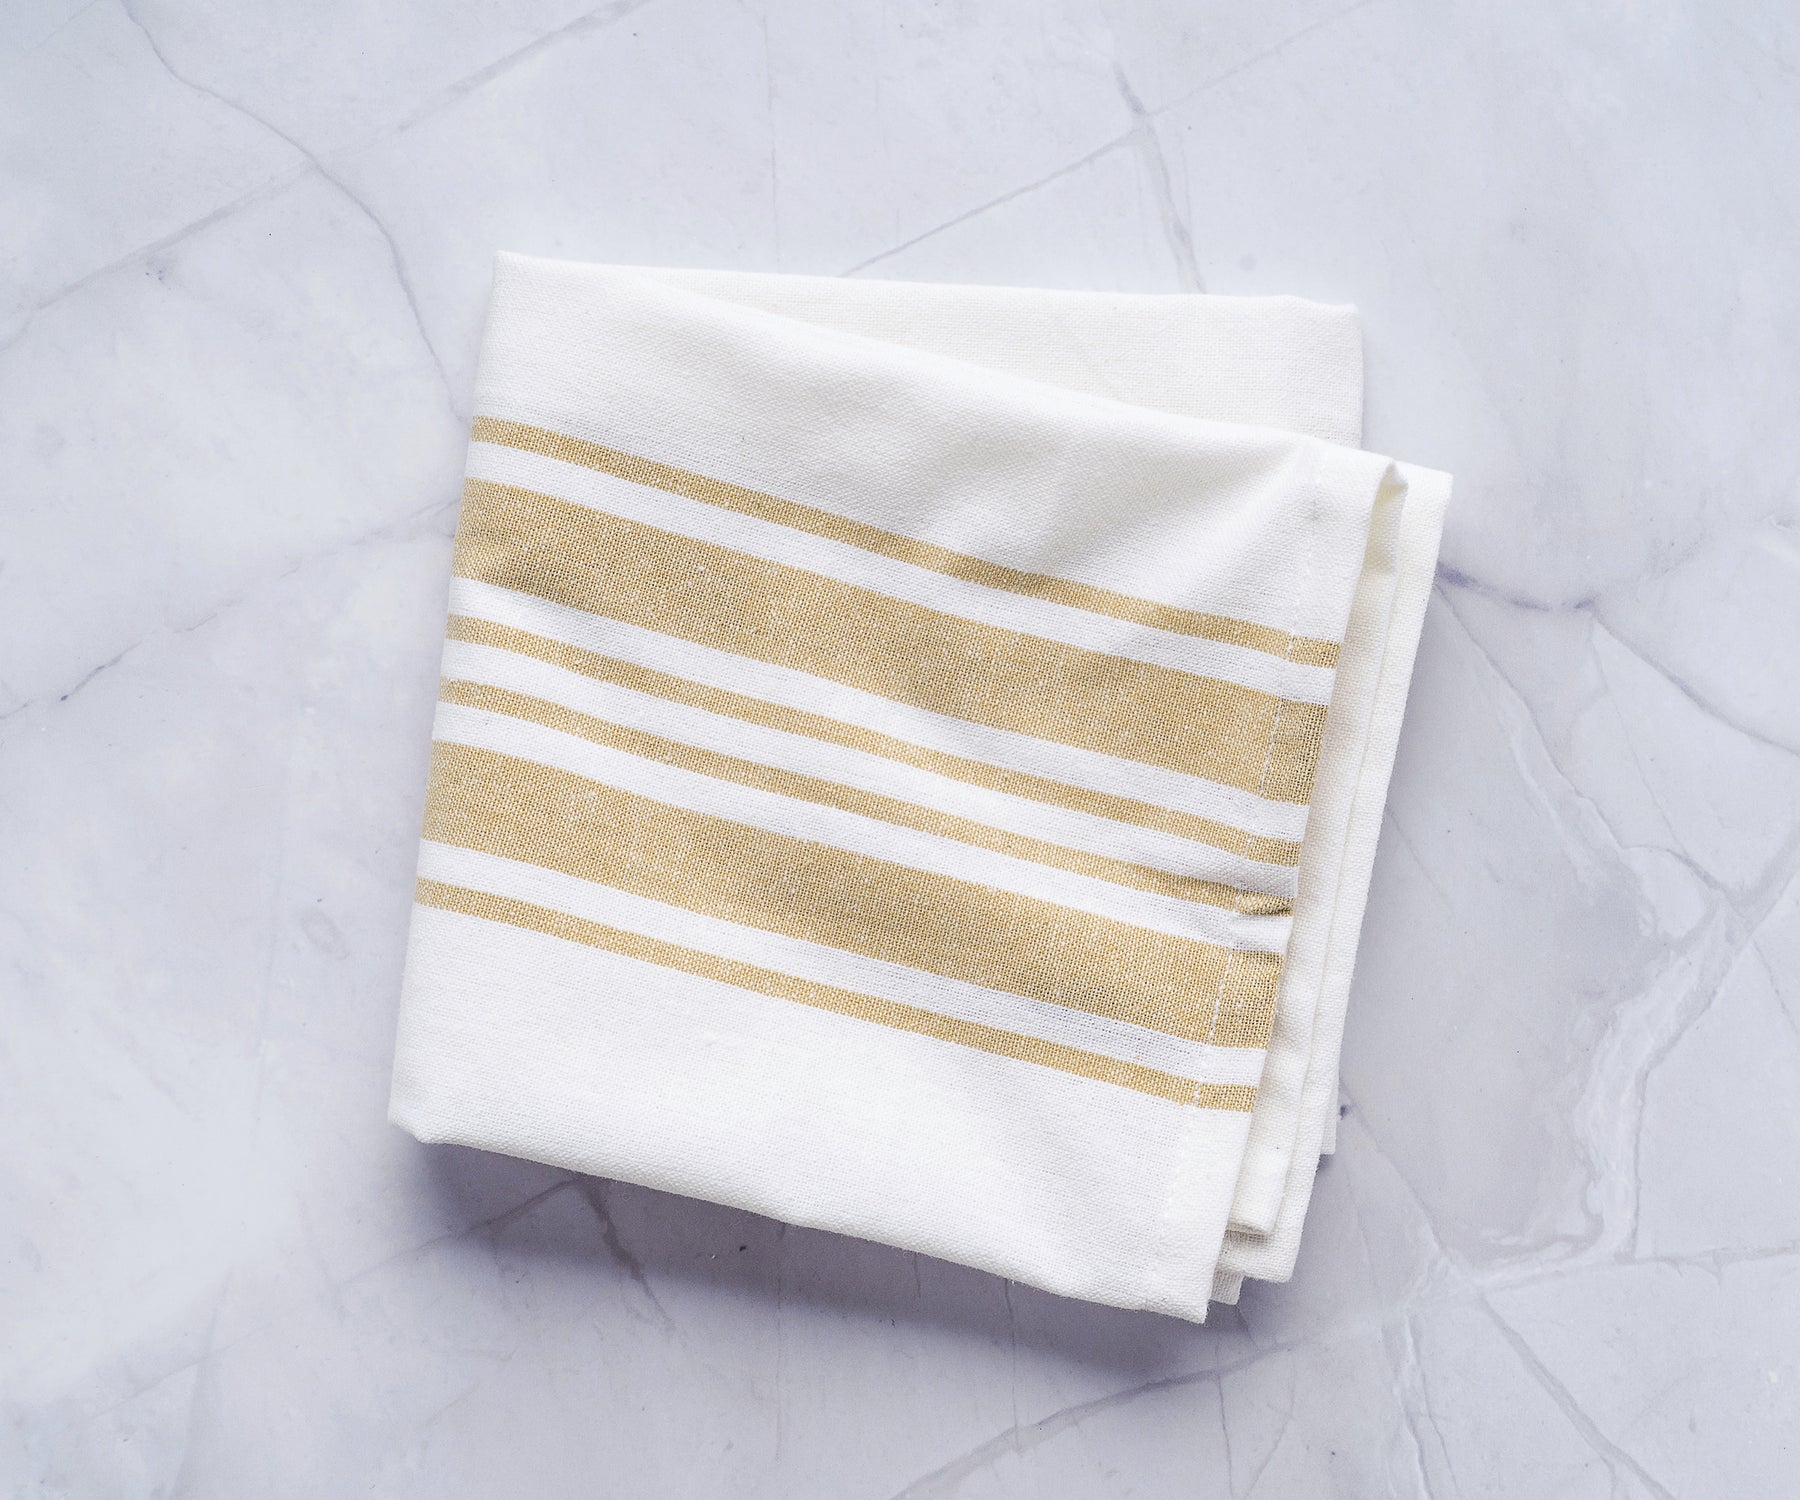 Close-up of a white kitchen towel with gold stripes on a polished marble countertop